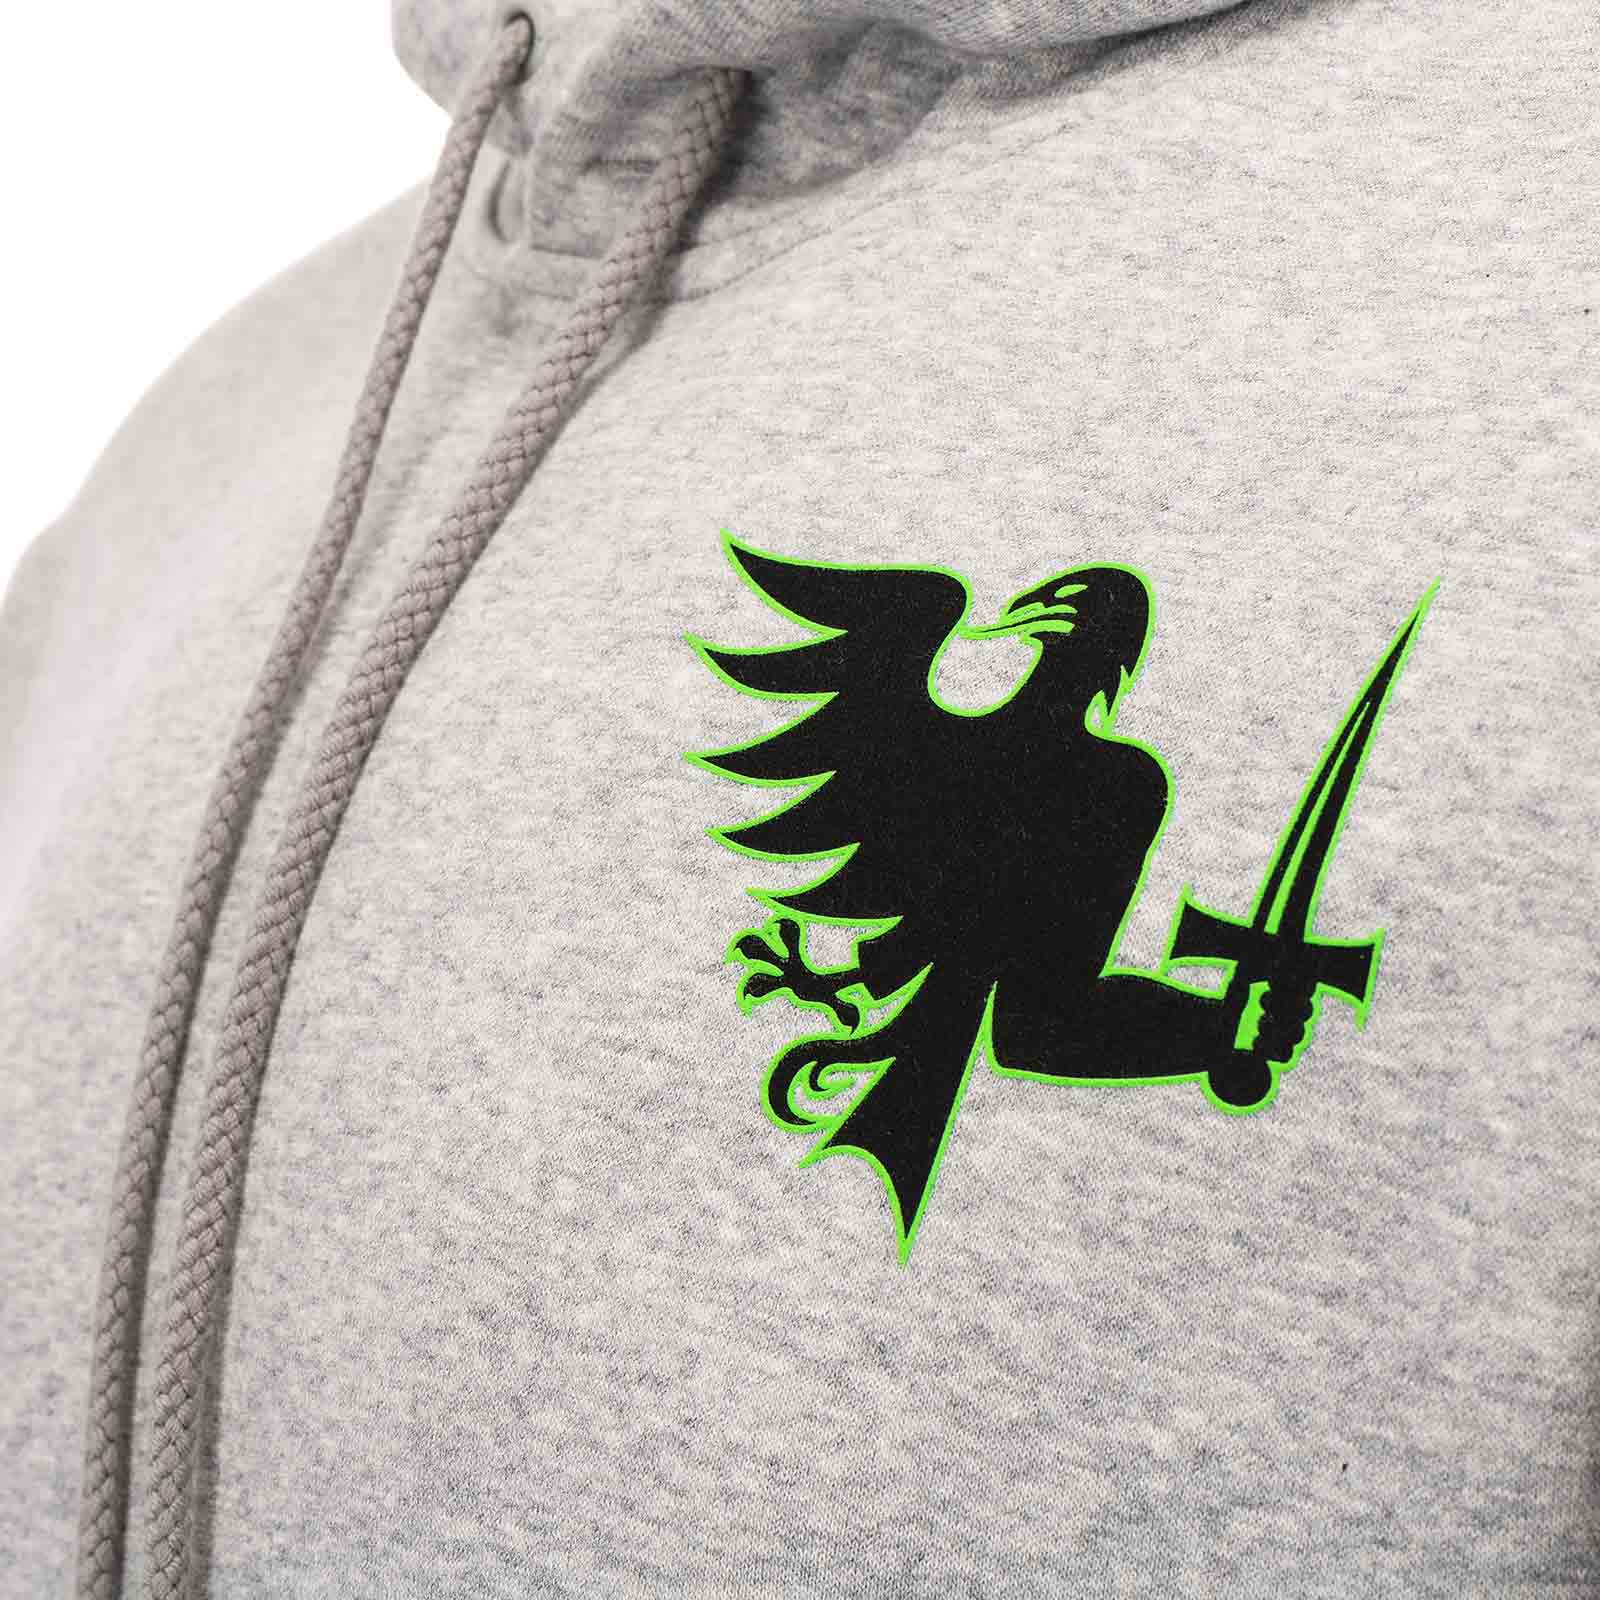 NEW ERA CONNACHT RUGBY CORE PULLOVER HOODIE